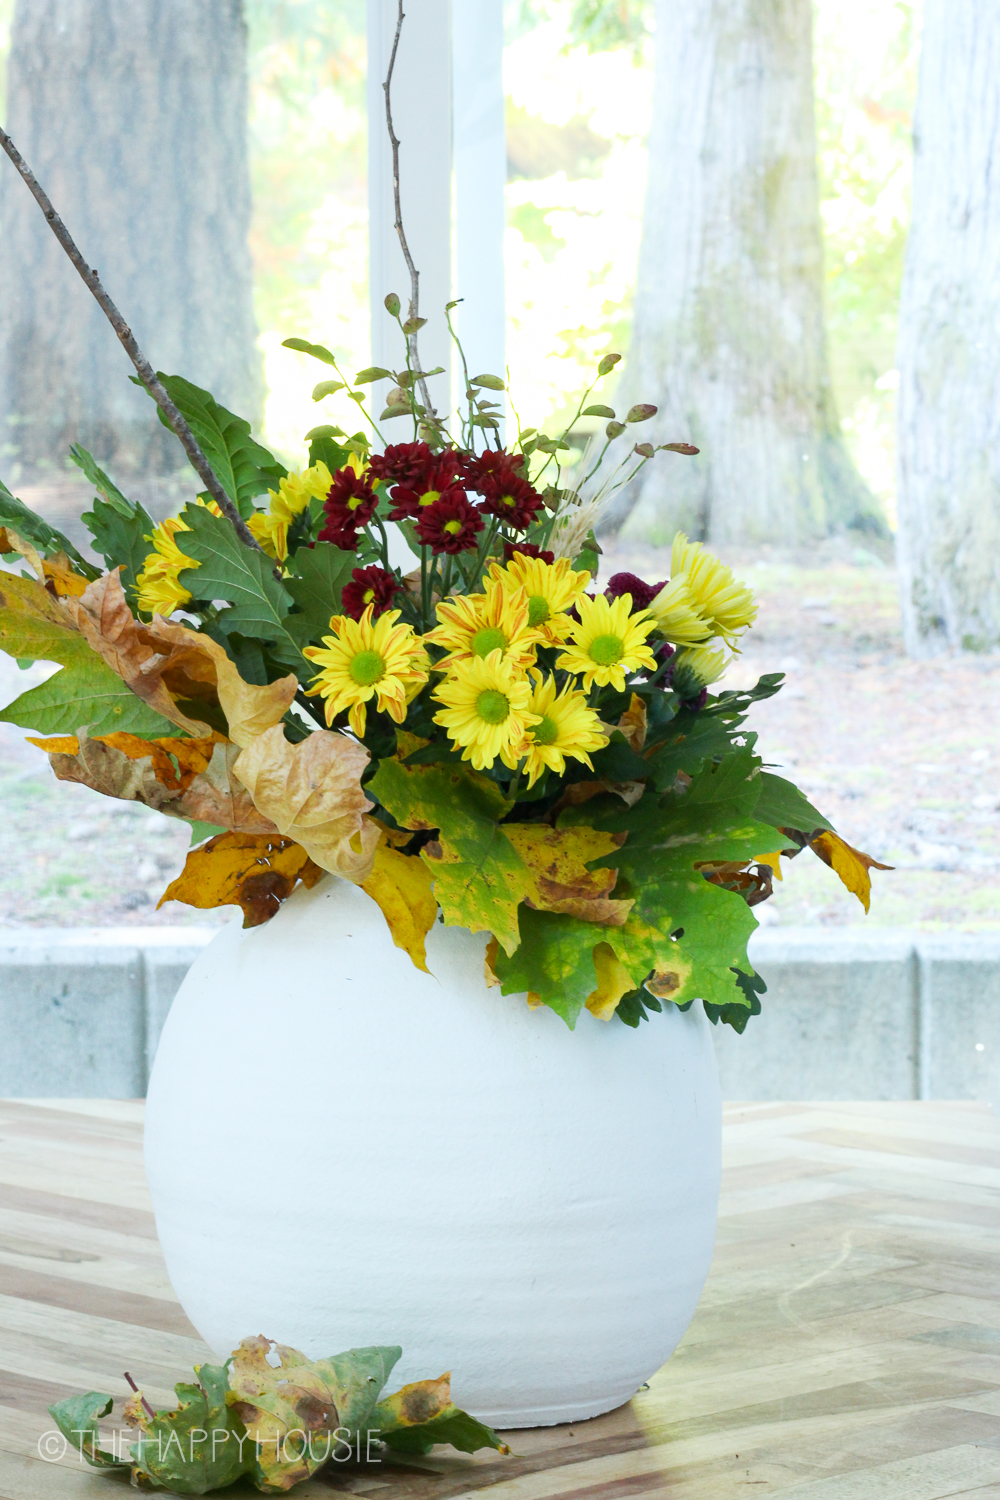 The flowers, leaves and branches in the vase on the counter.